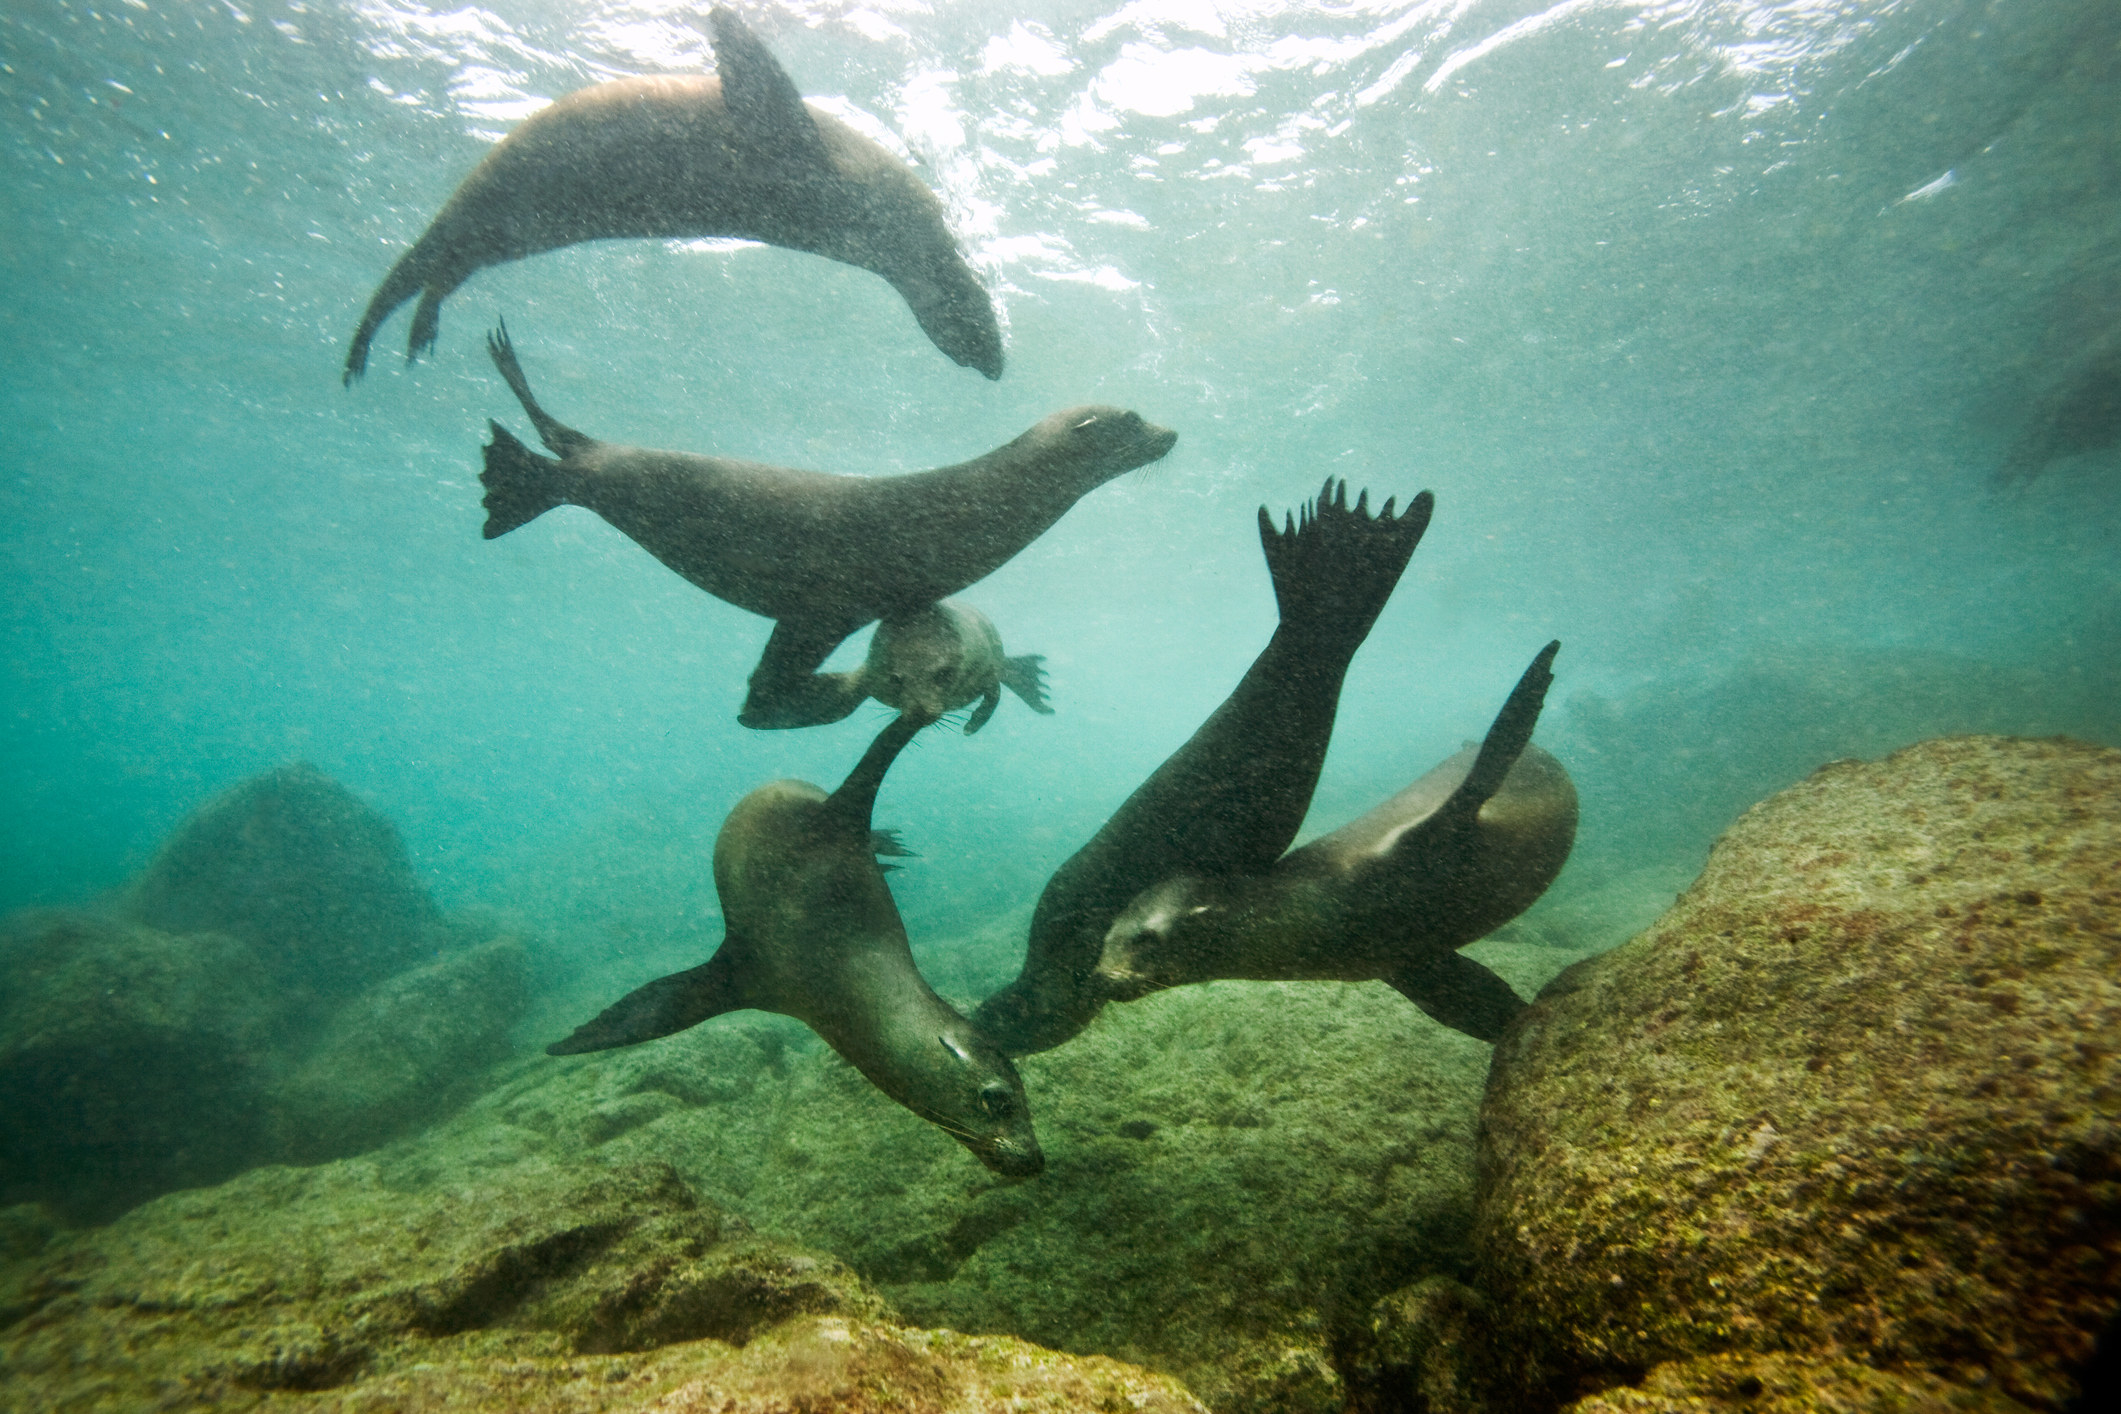 Galapagos sea lions swimming underwater.